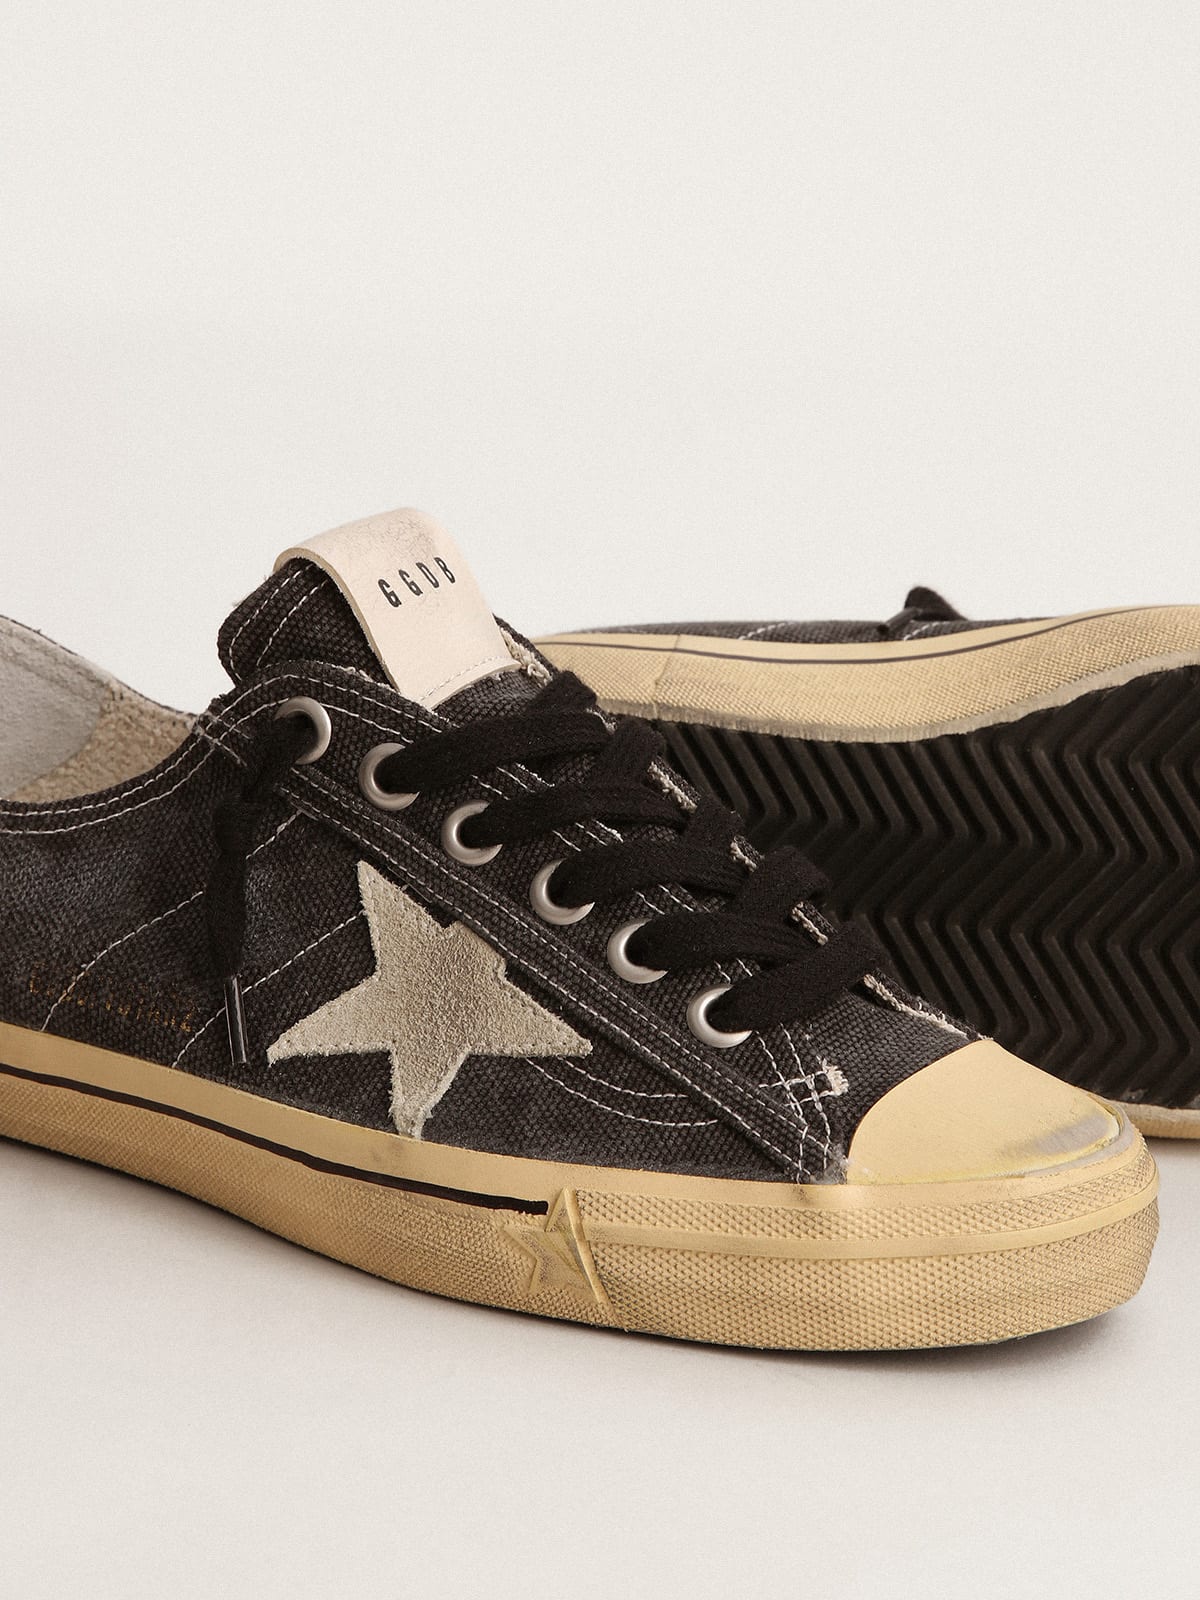 Golden Goose - V-Star LTD sneakers in black canvas with ice-gray suede star and heel tab in 